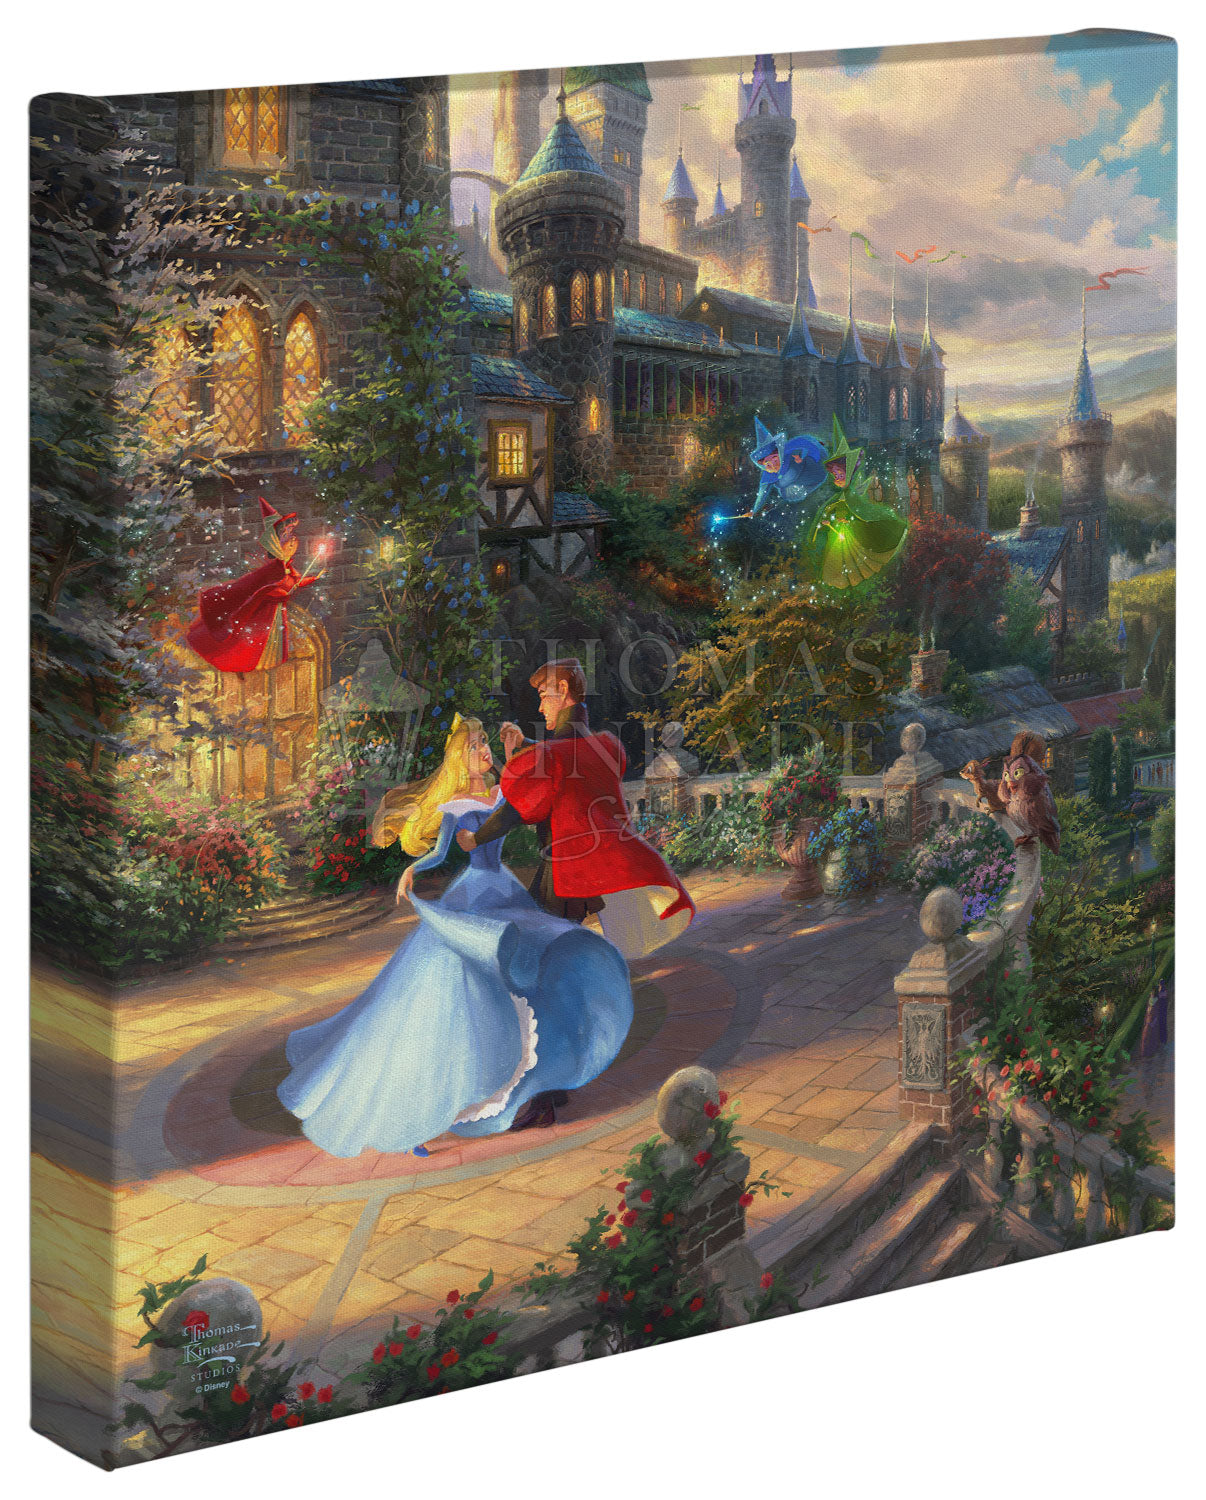 Aurora and the Prince are in the courtyard under an enchanted light streaming down from the good fairies. 